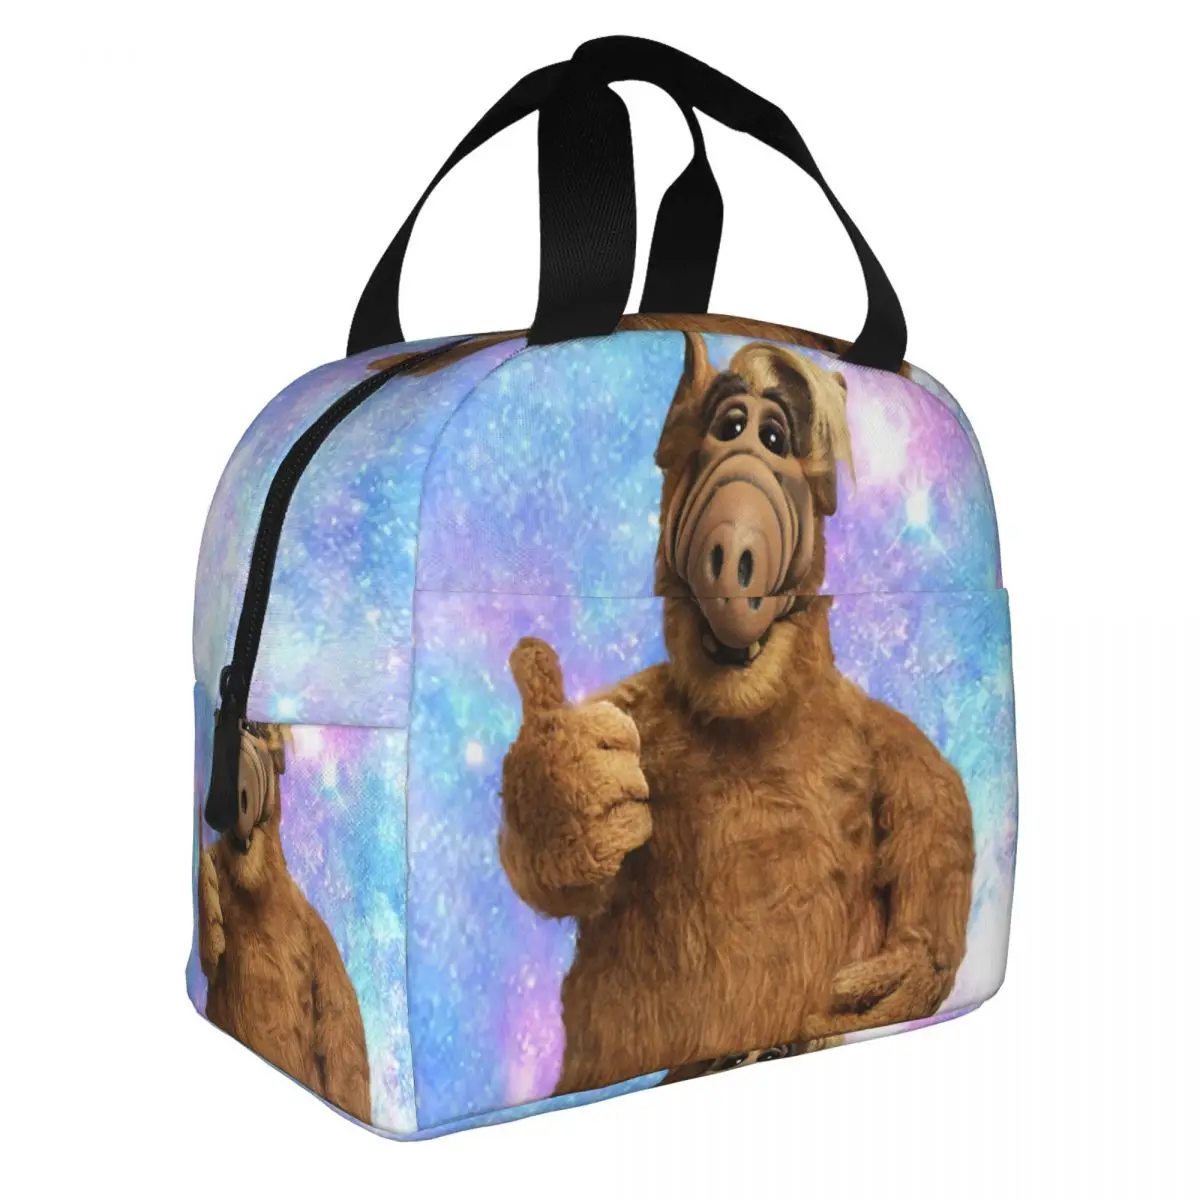 

Alf Thumbs Up Insulated Lunch Bag Leakproof Thermal Cooler Alien Life Form Tv Show Bento Box for Women School Picnic Food Bags